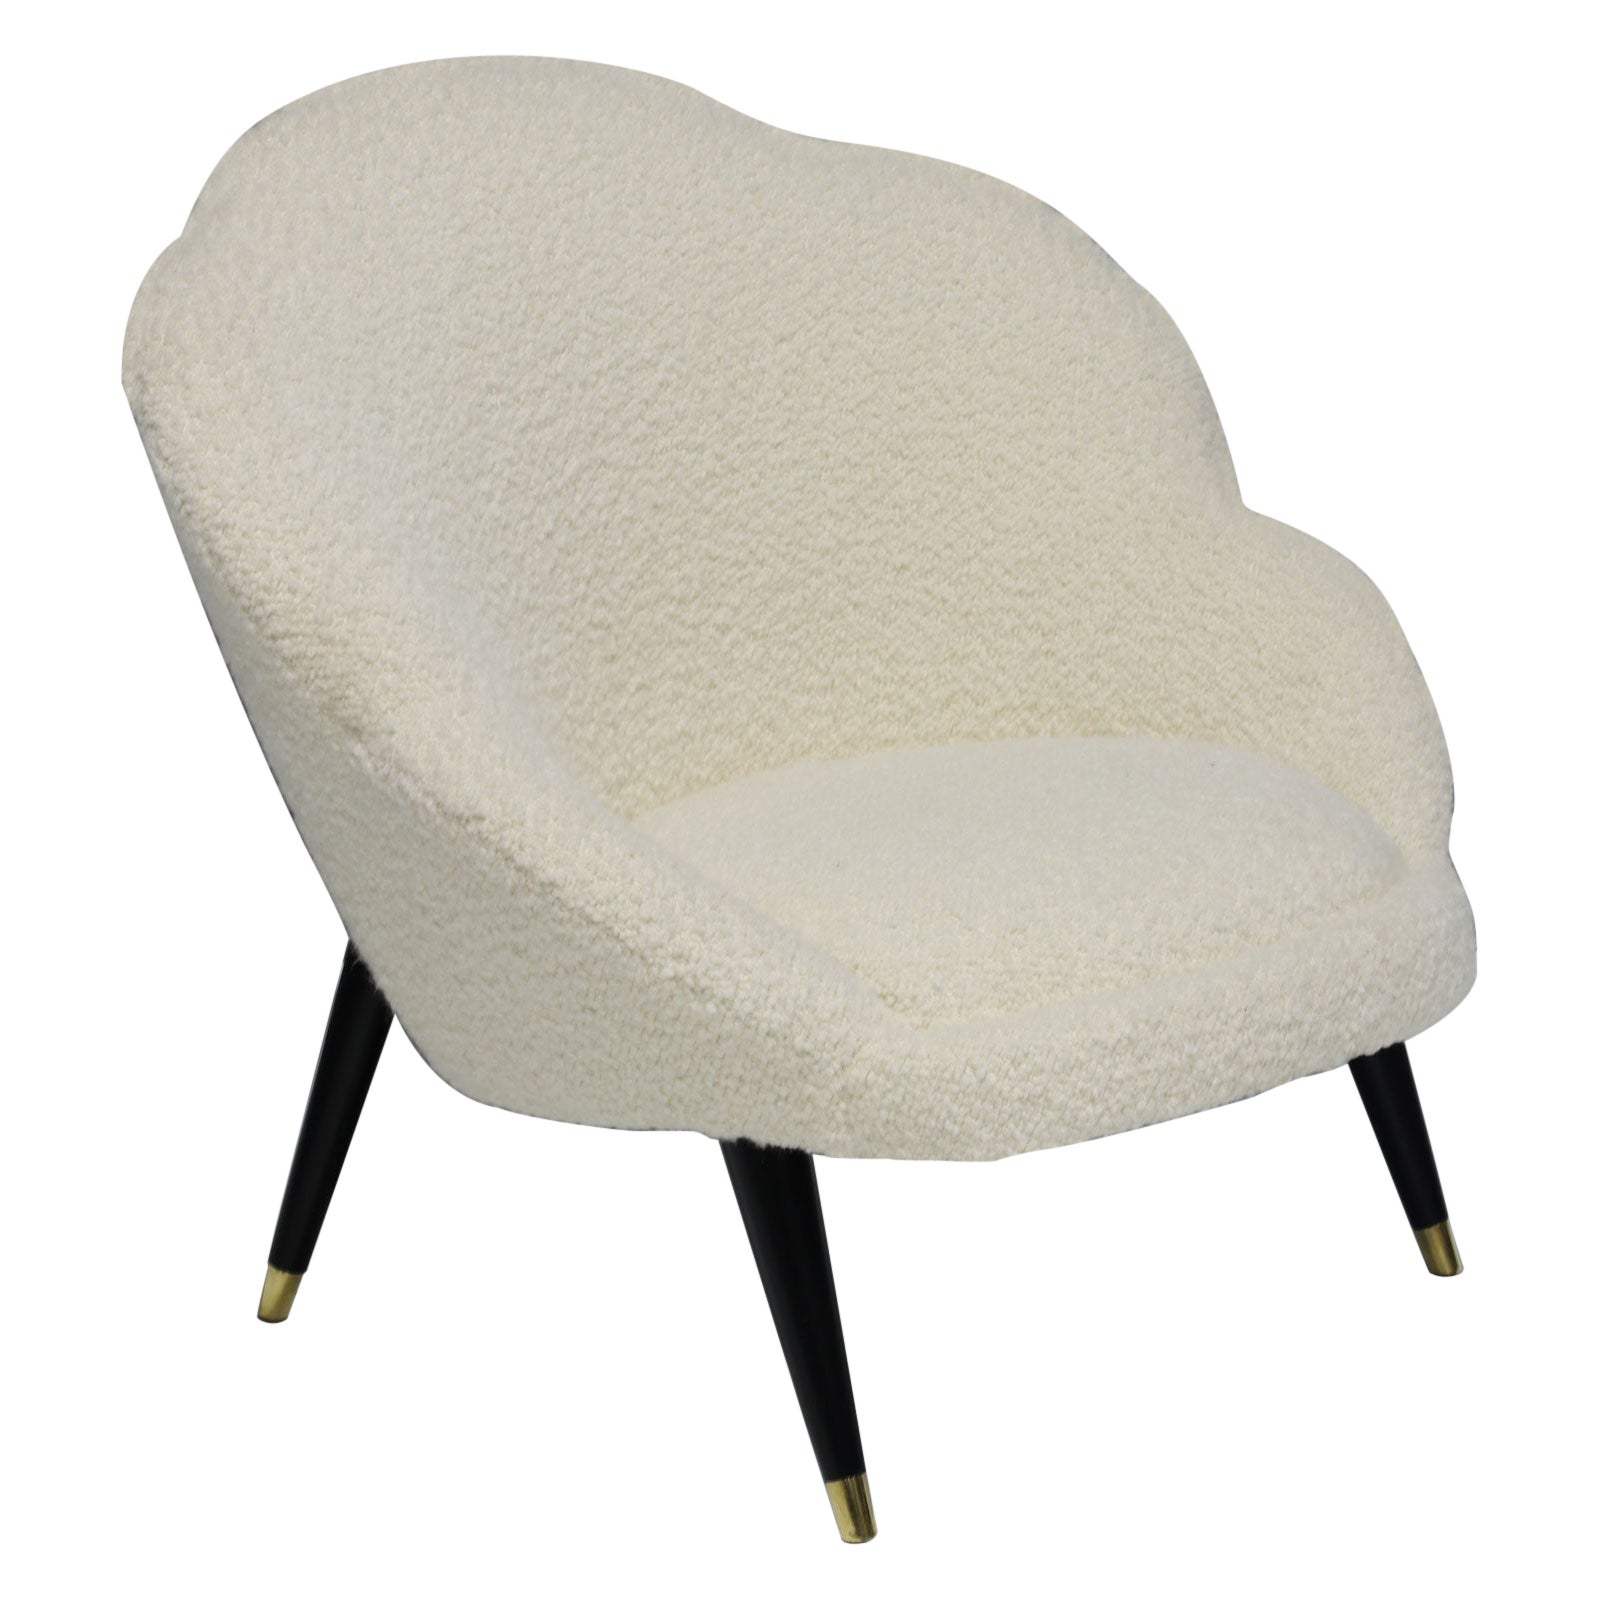 Scalloped Edge Lounge Chair in Designer Boucle'